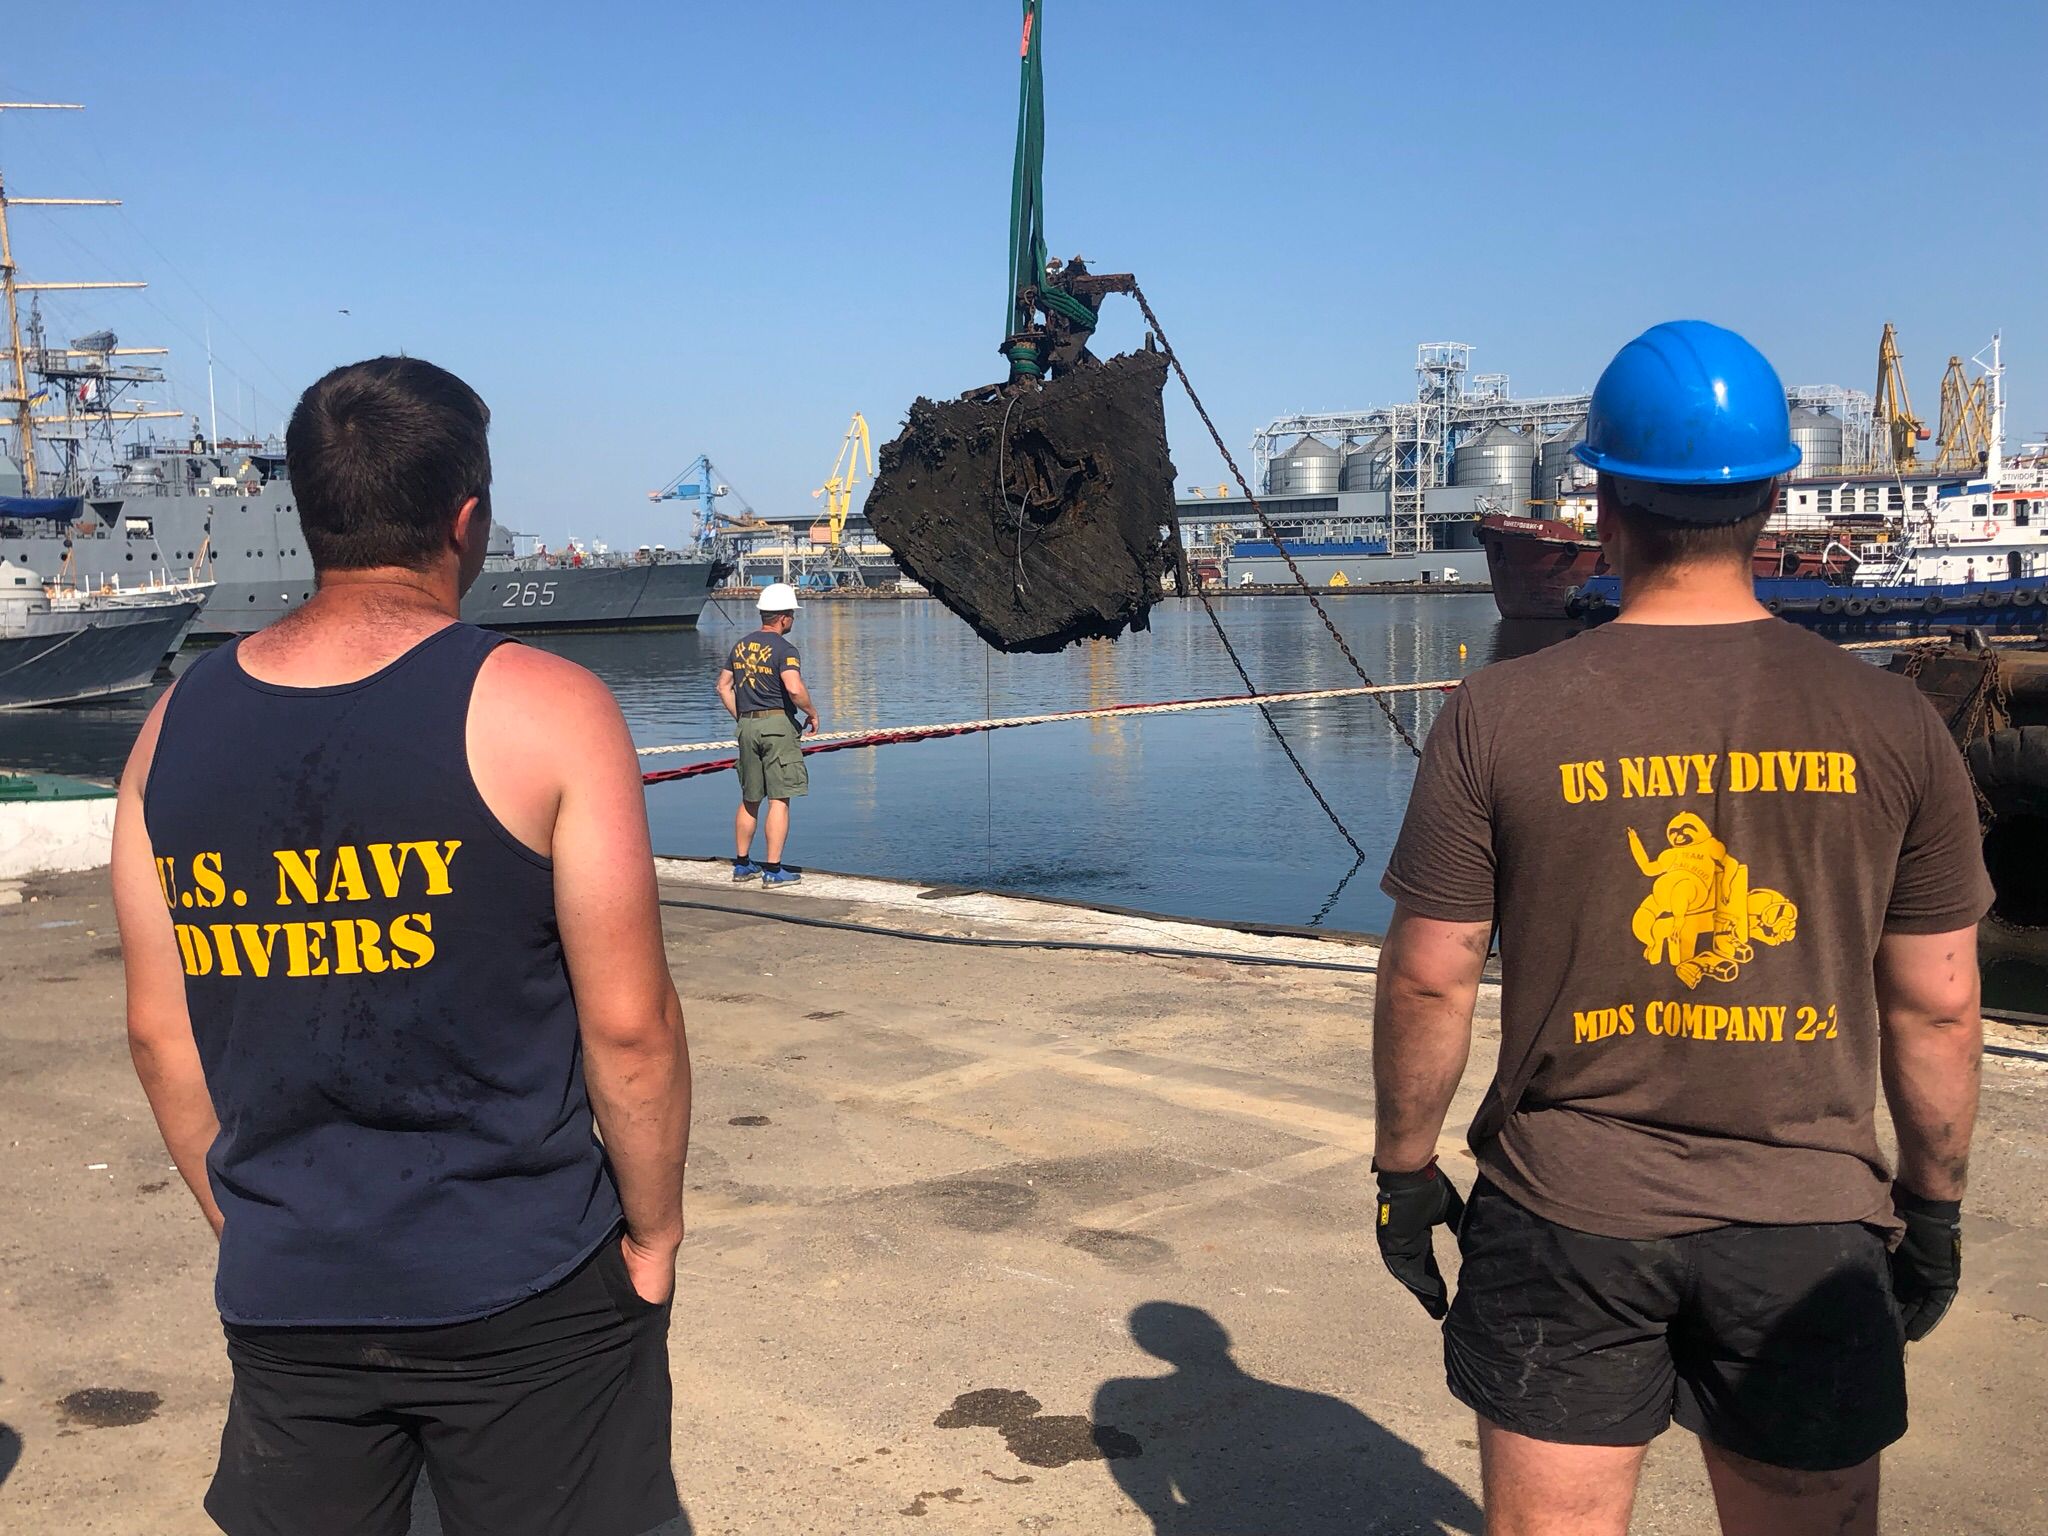 The US Navy is combining diver teams as it readies for future wars